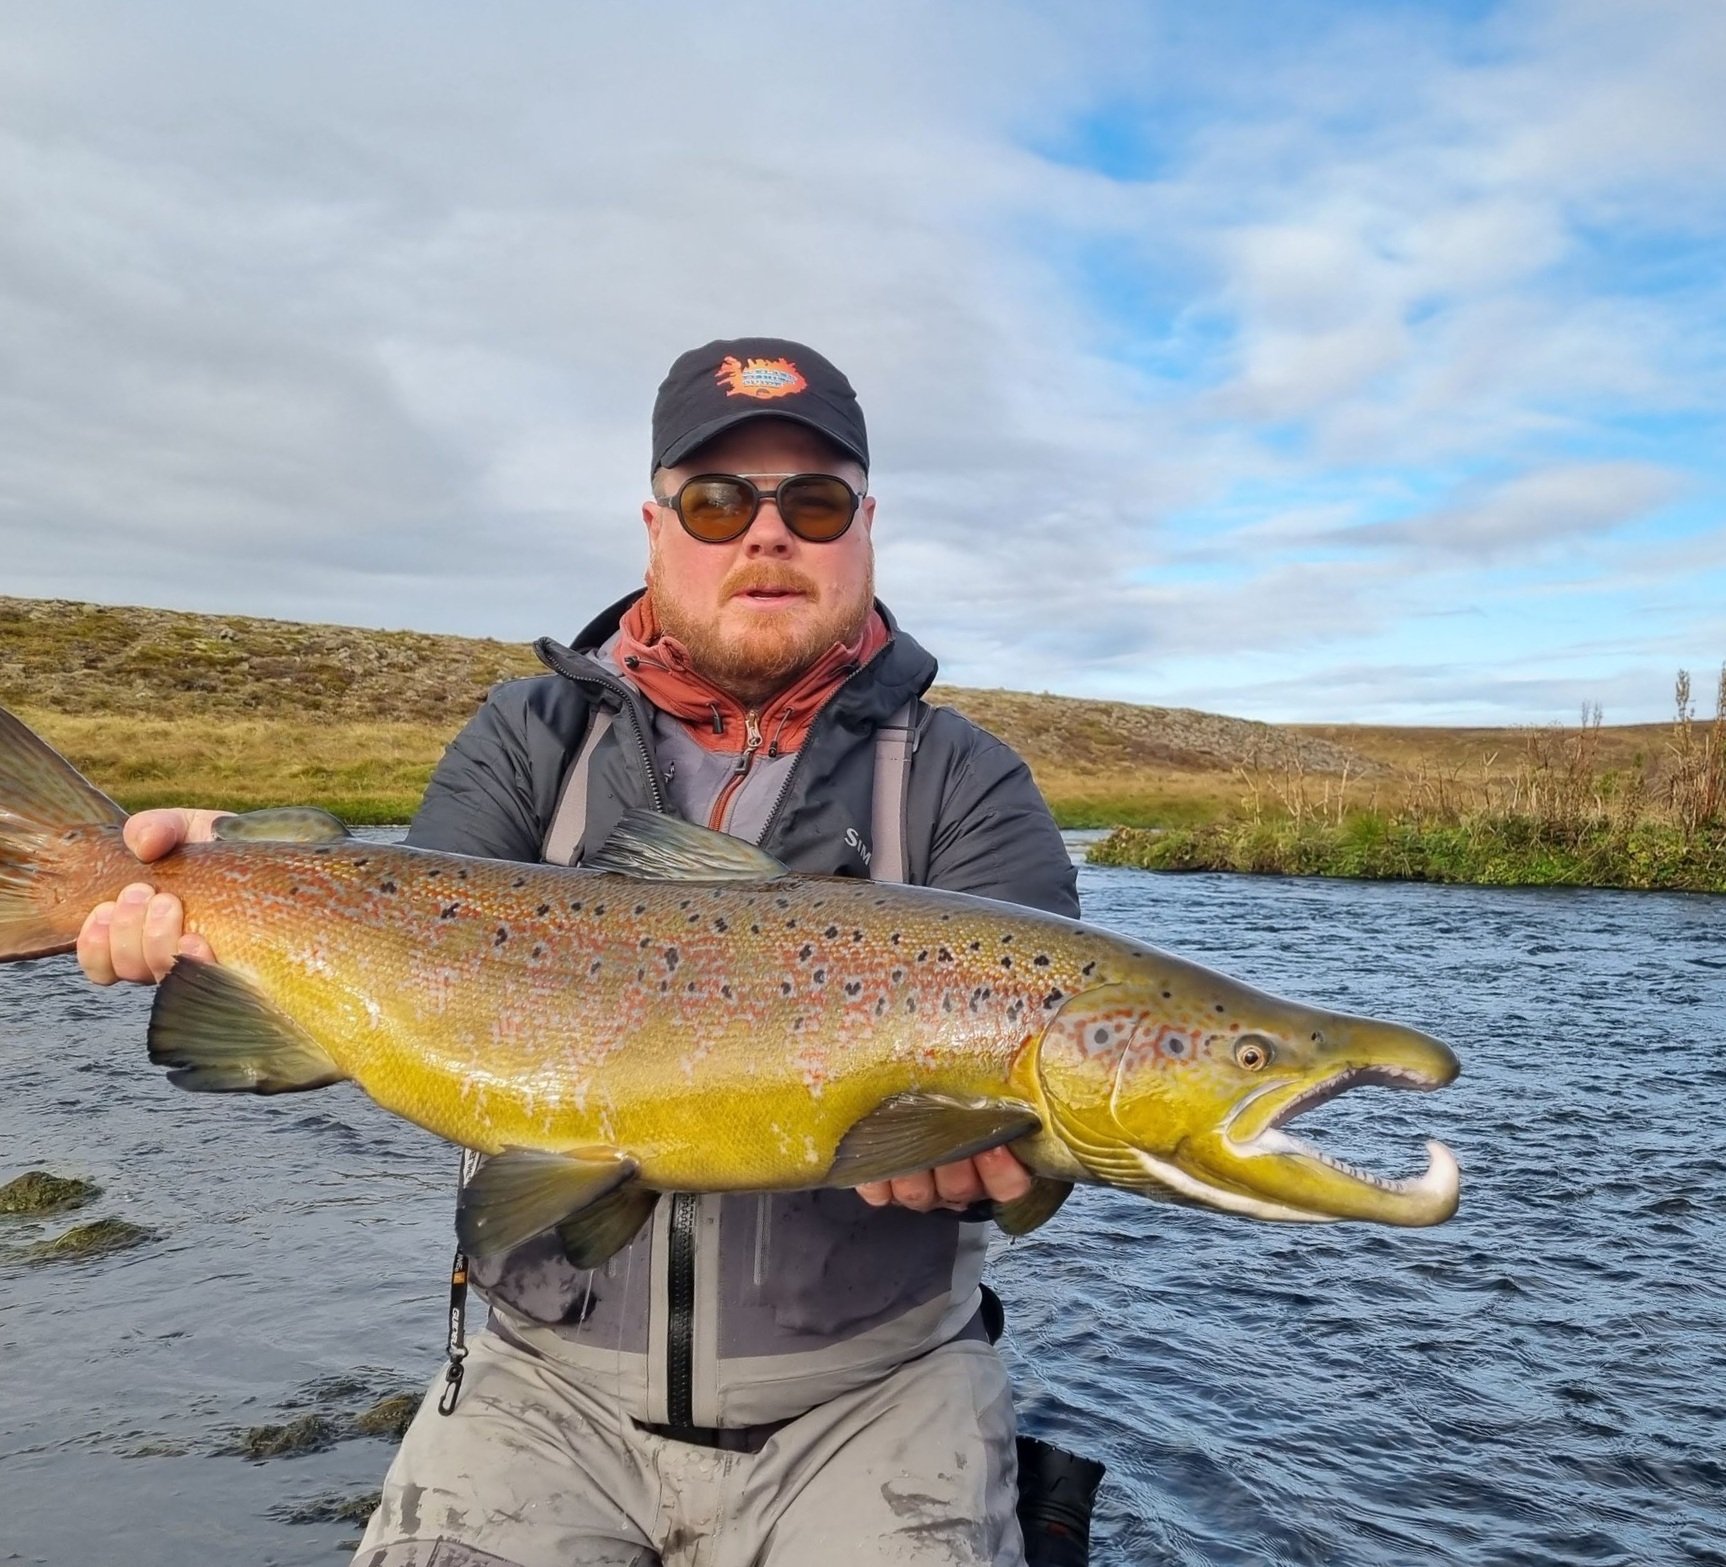 Iceland Fishing Guide owner Matti shows how it's done!